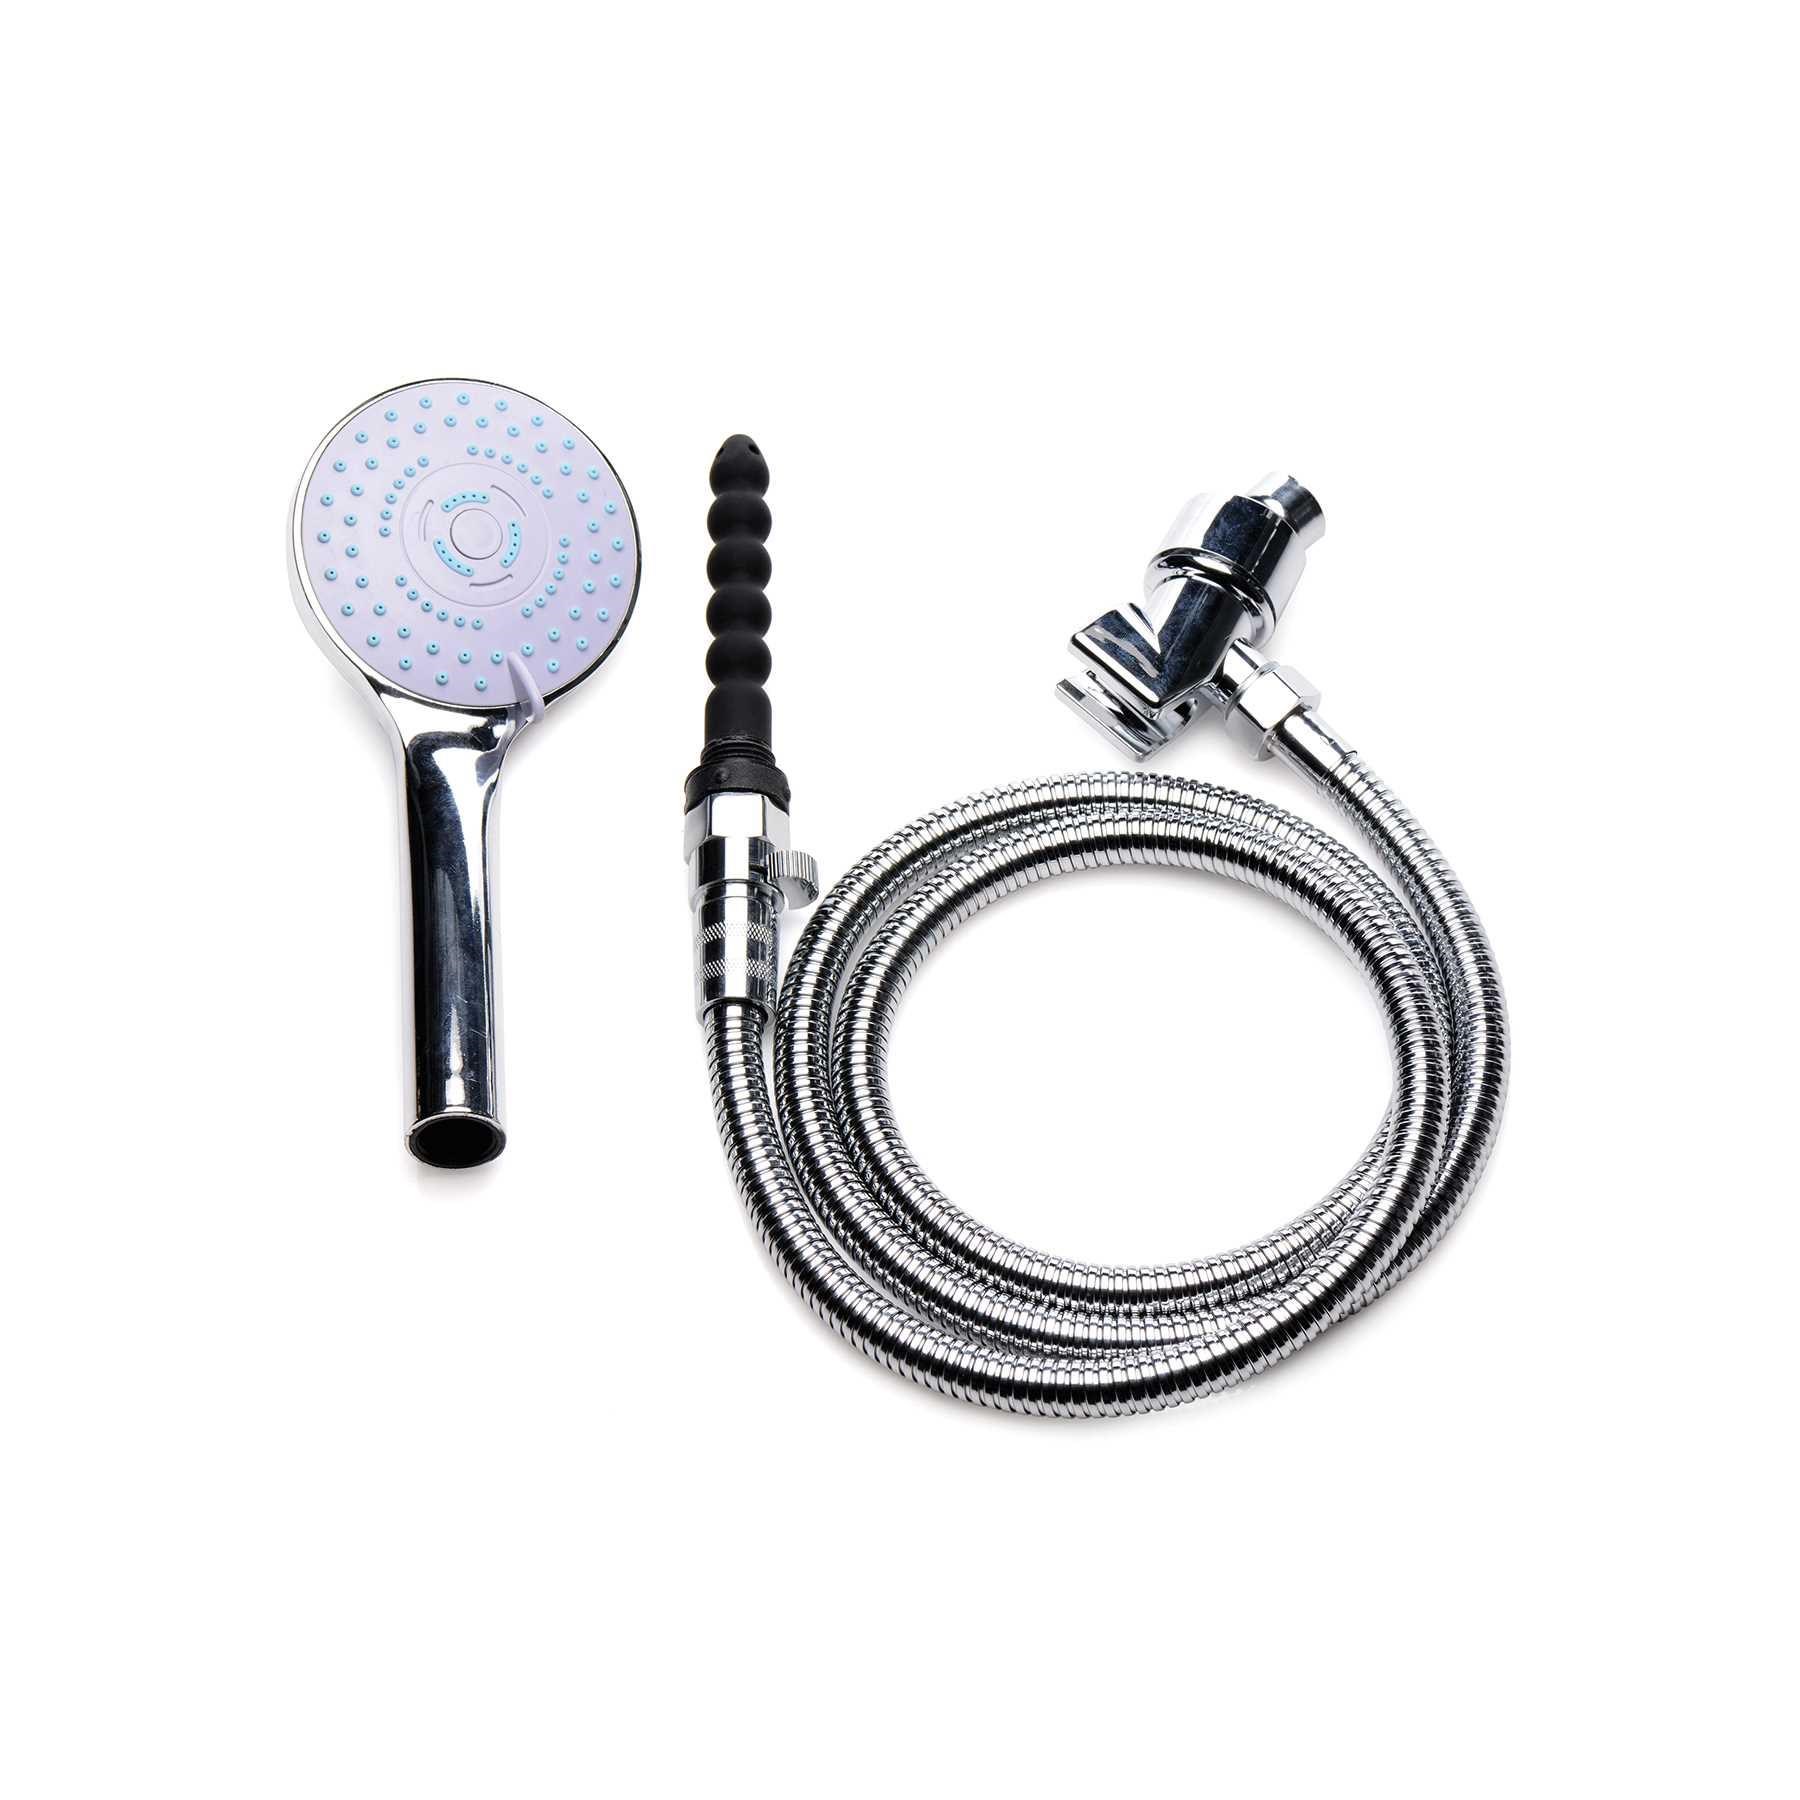 Discreet Shower Enema Set shown with insertable nozzle attached